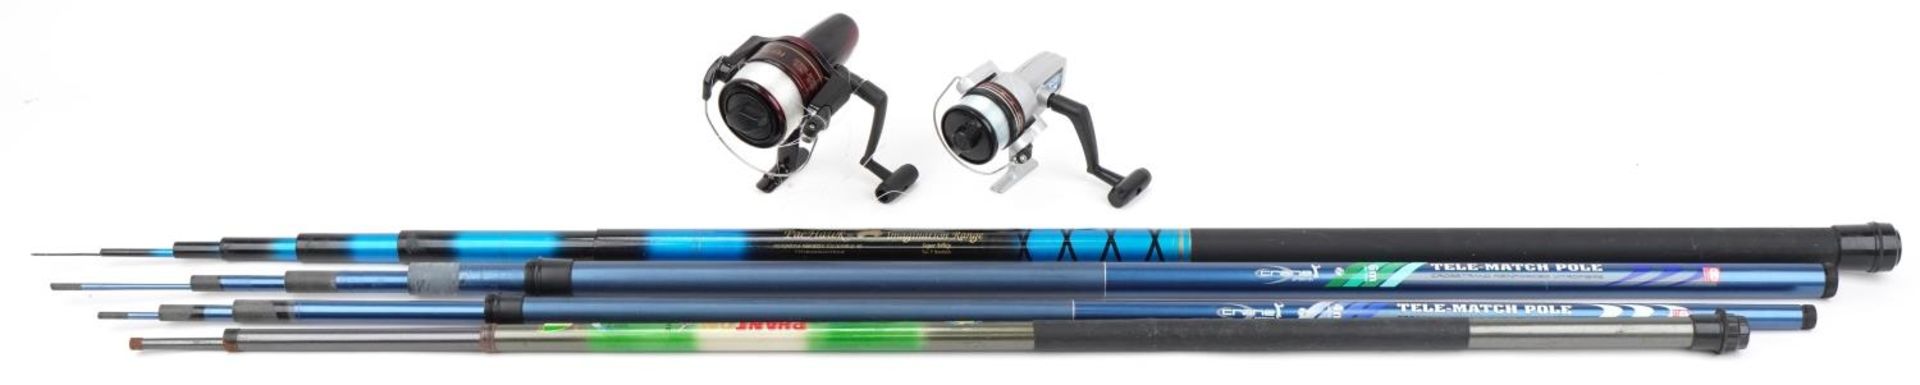 Four fishing poles and two fishing reels including PacHawk Super Whip and Crane Tele-match pole :